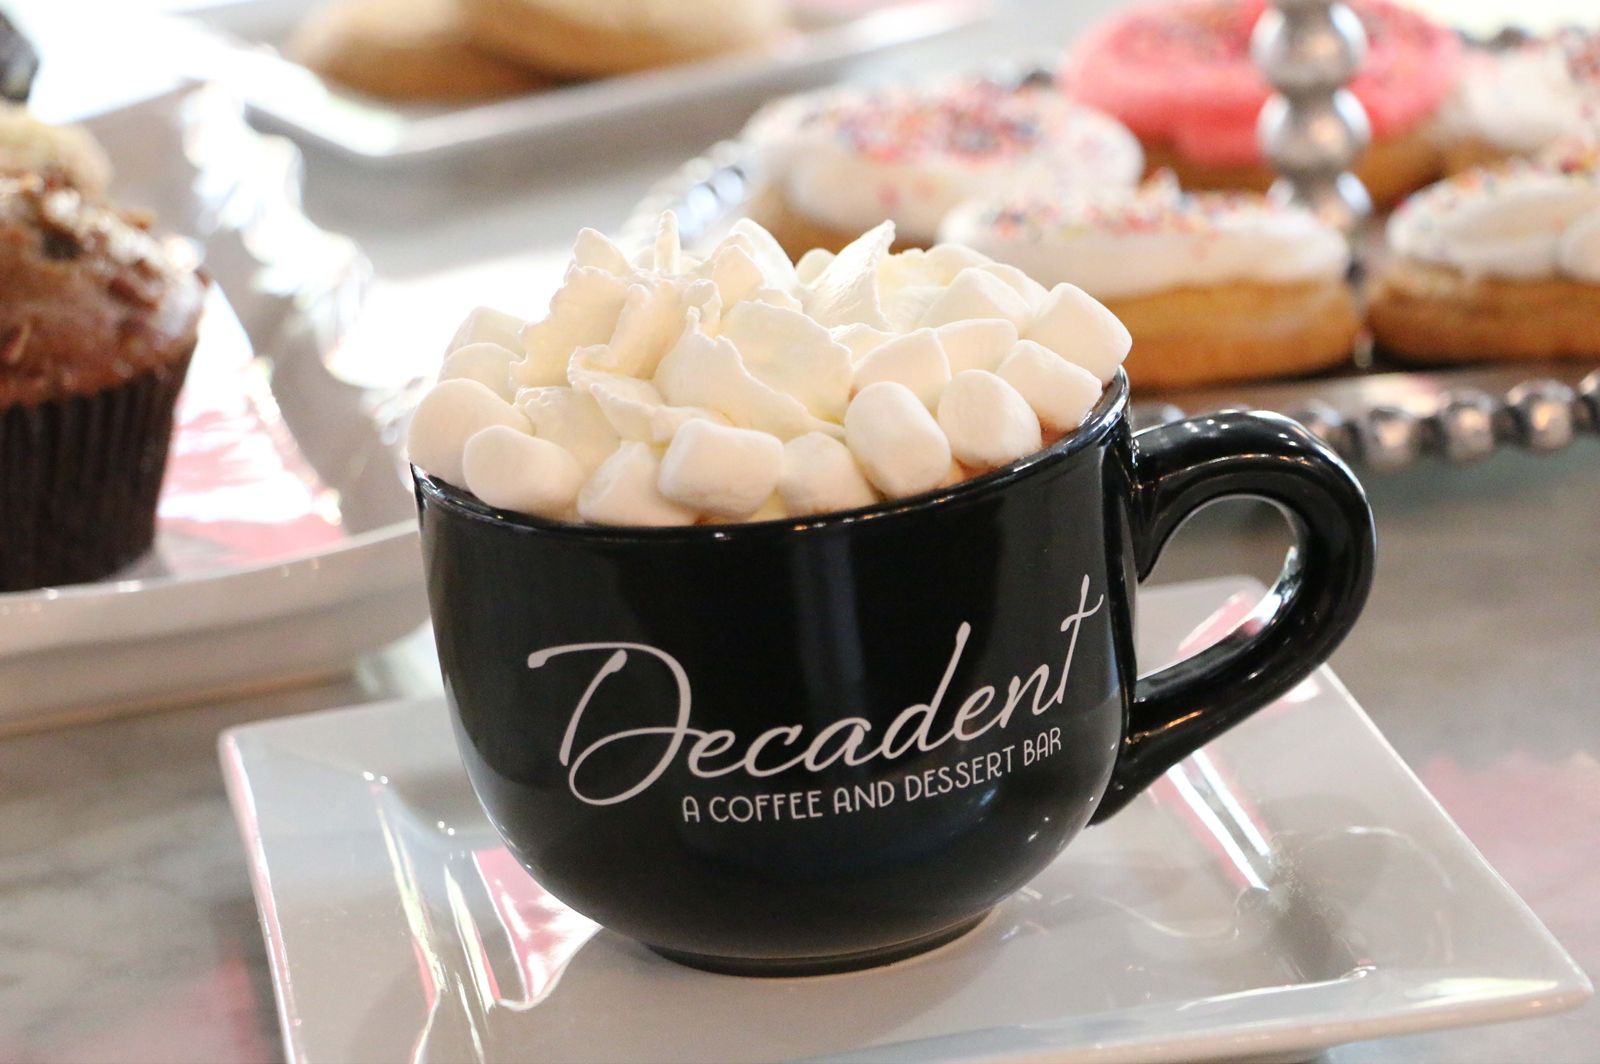 Decadent A Coffee and Dessert Bar Opens First Location in Houston, TX!